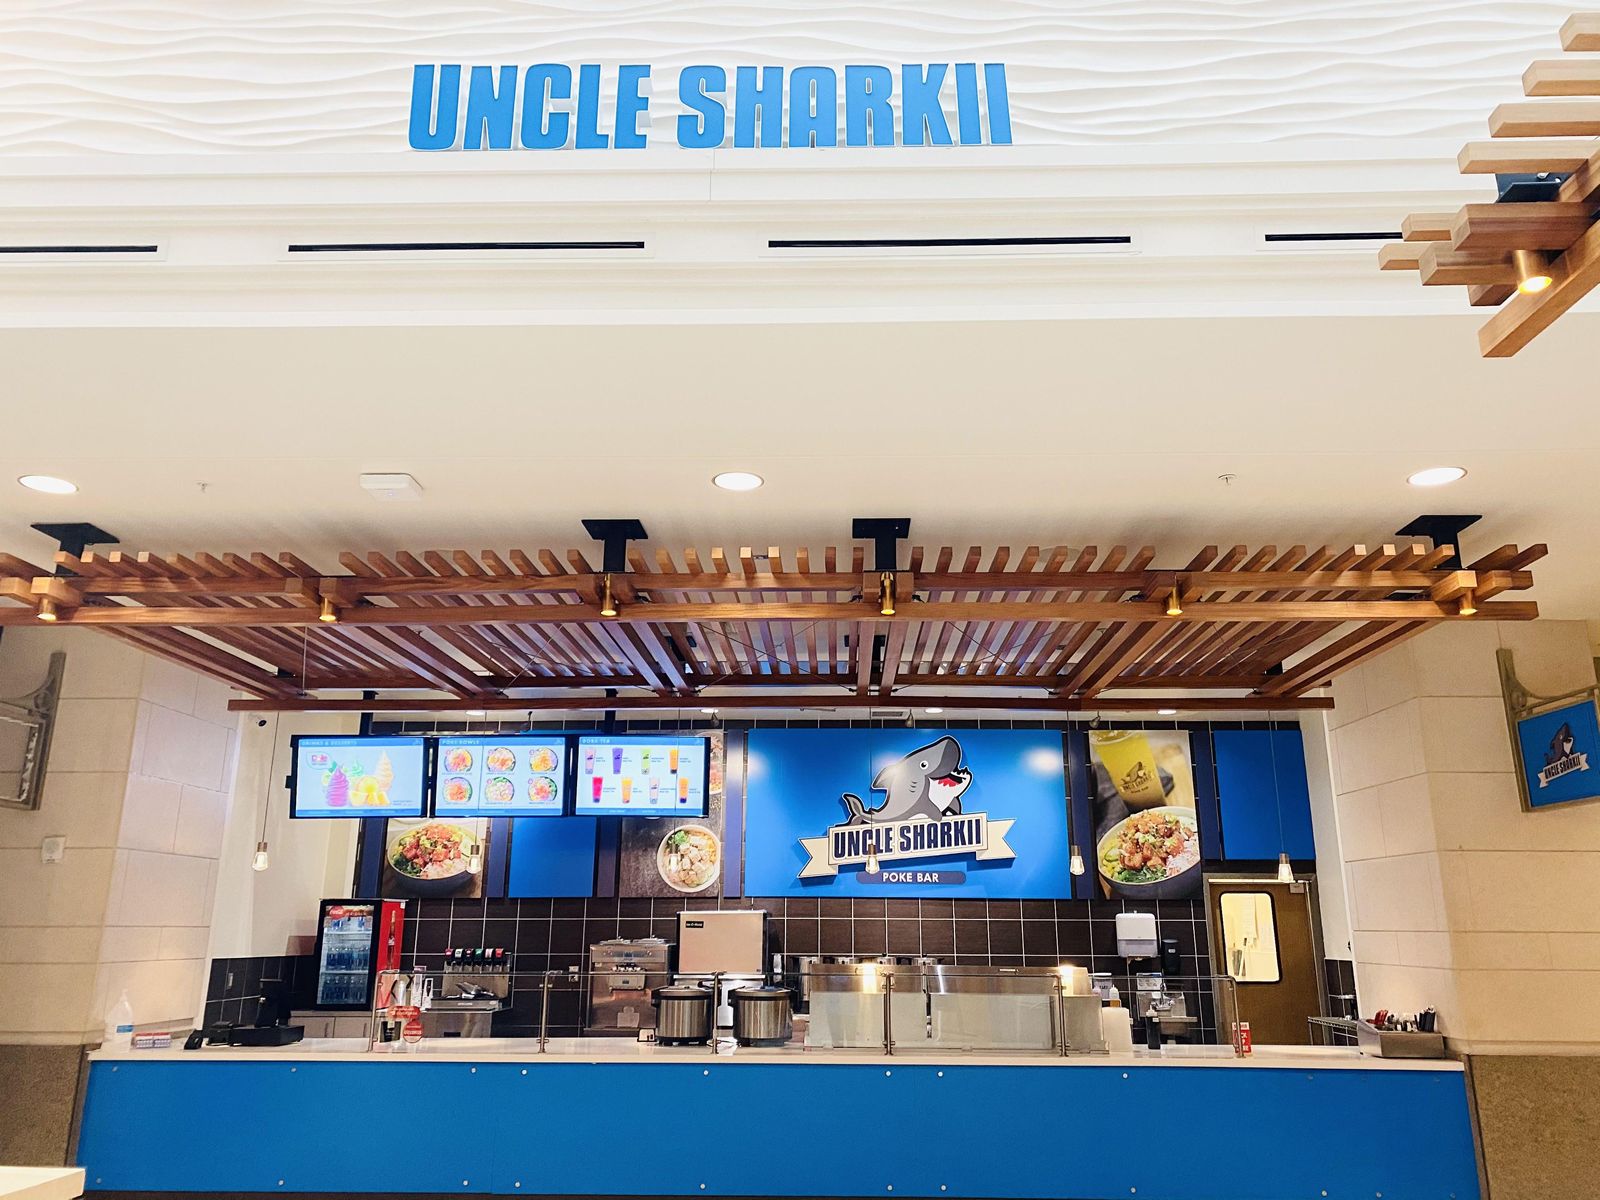 Uncle Sharkii Makes a Big Catch with Multi-Unit Deal